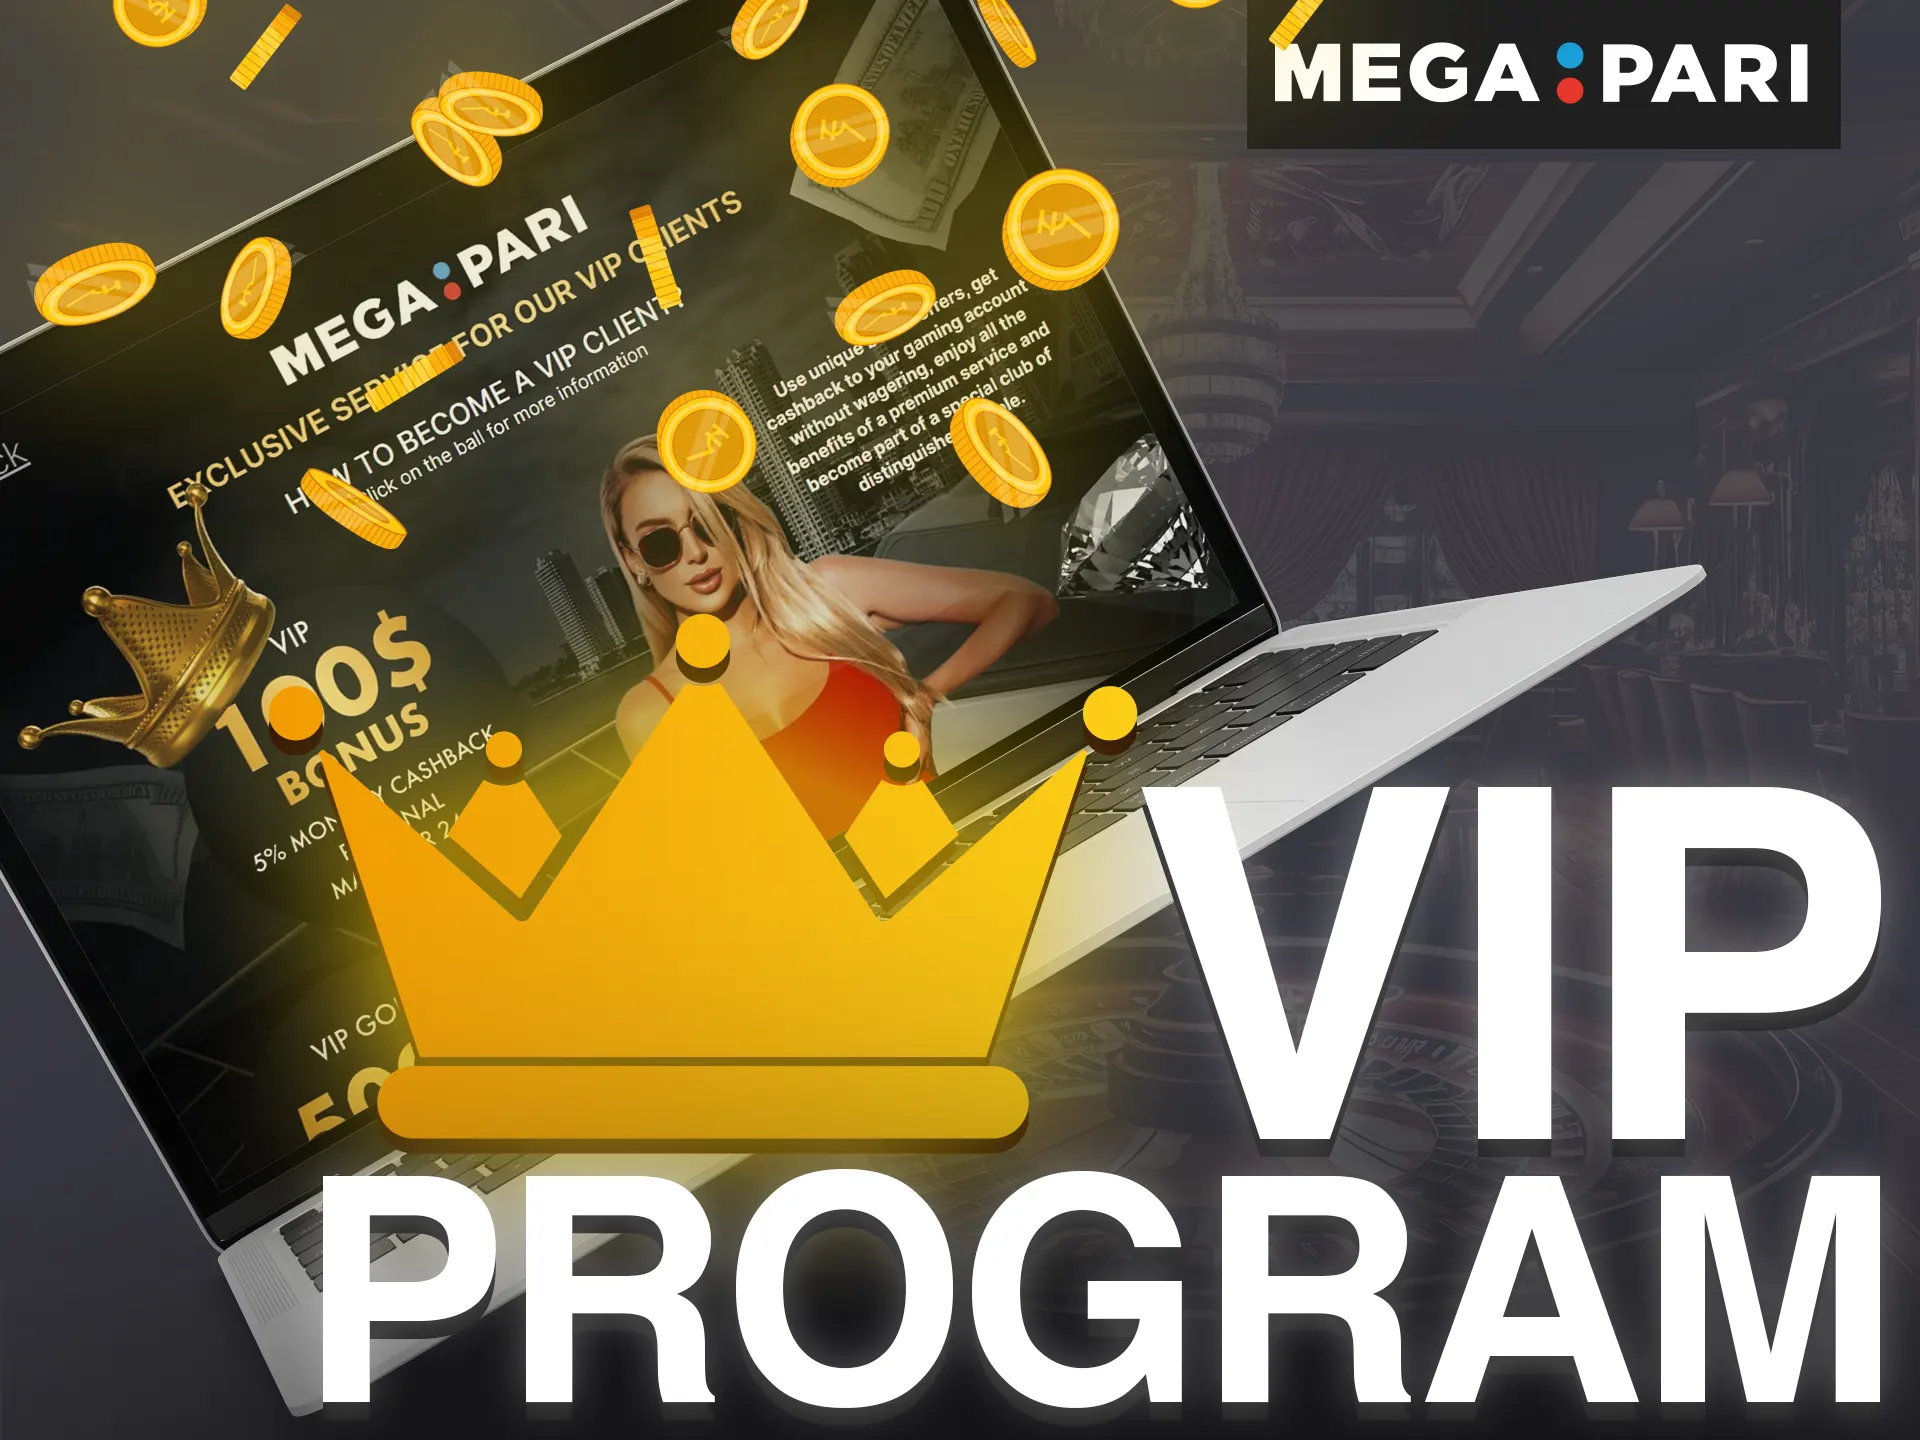 VIP program members receive special benefits including better odds and cashback.